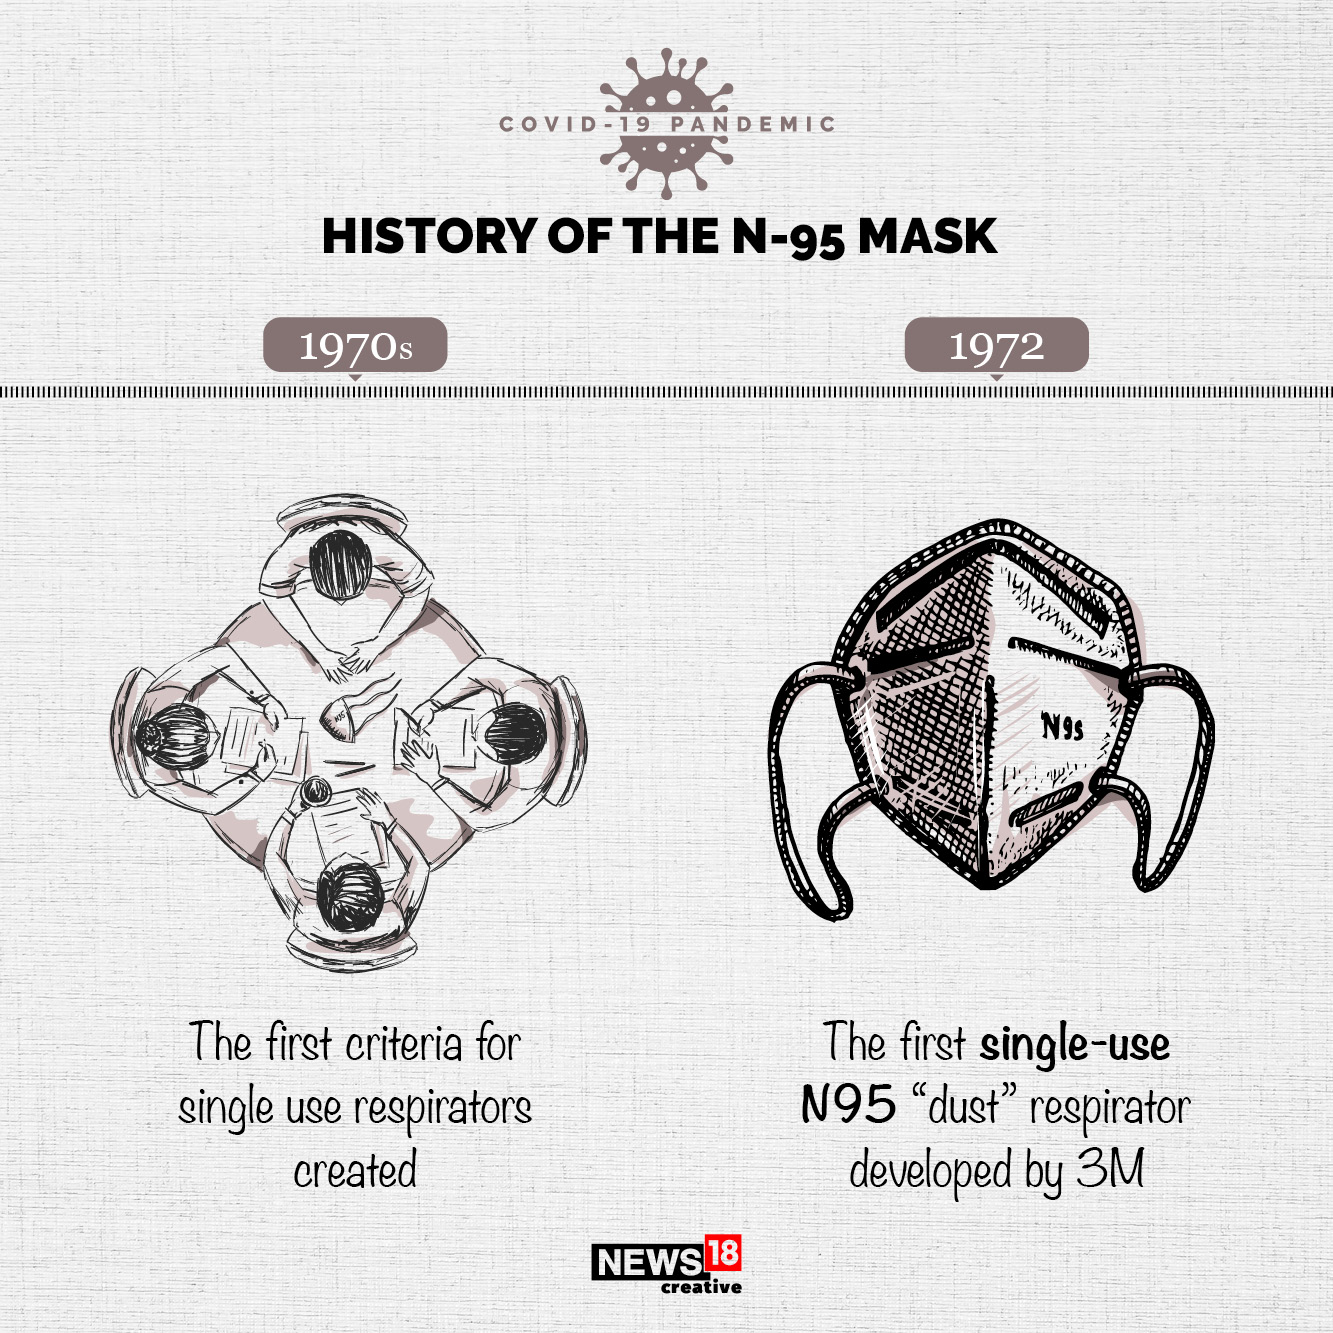 The history of the N-95 mask